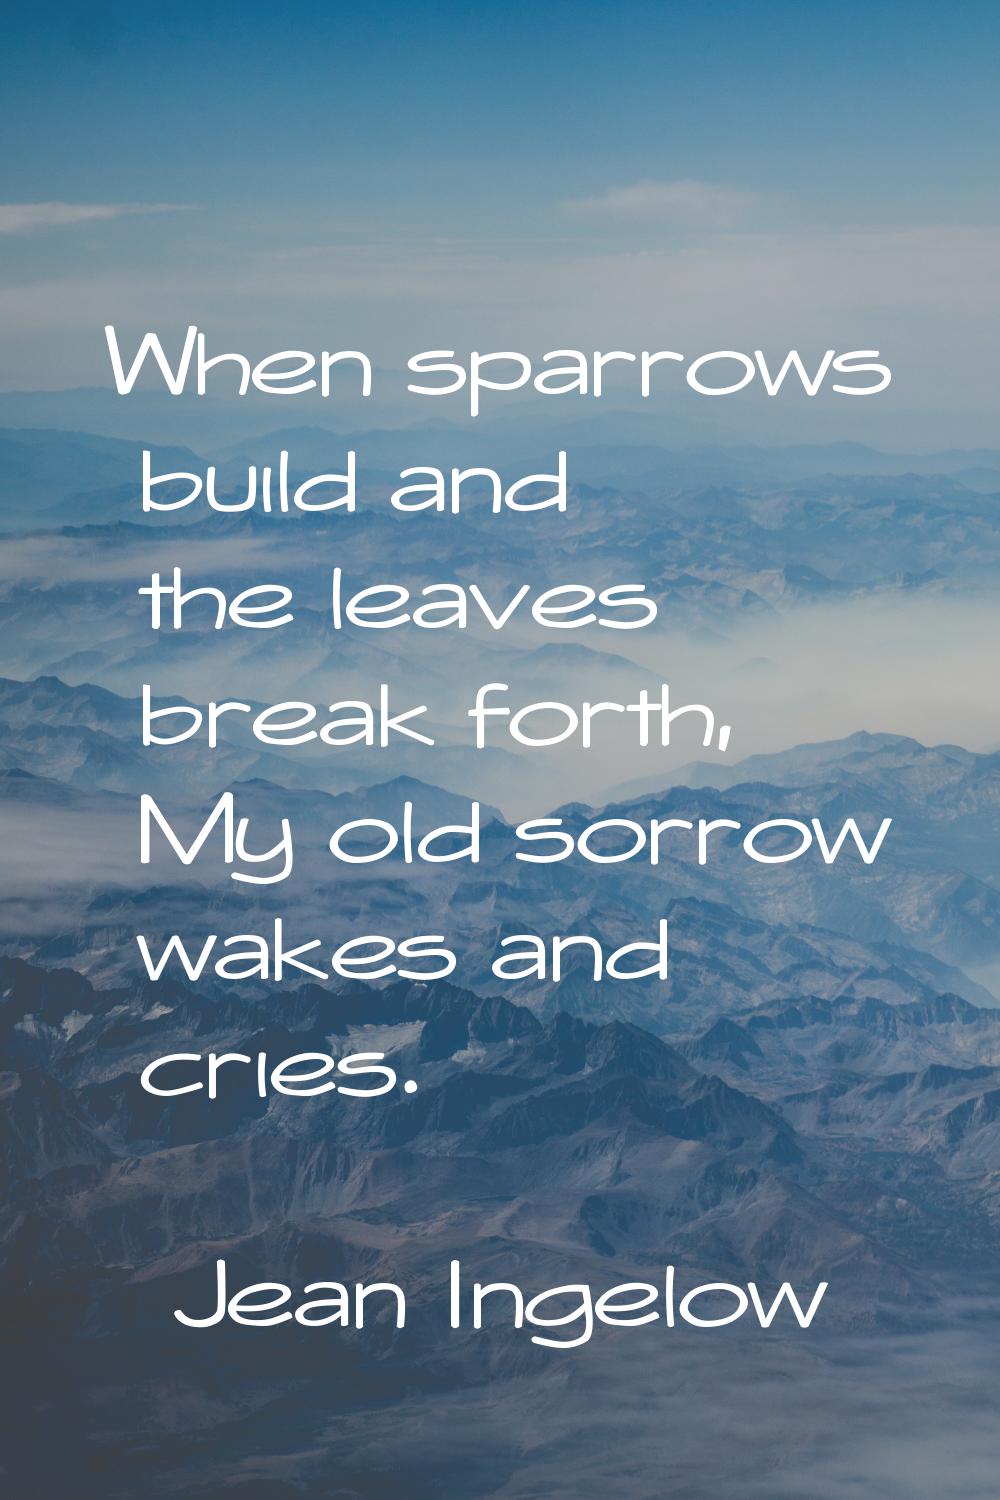 When sparrows build and the leaves break forth, My old sorrow wakes and cries.